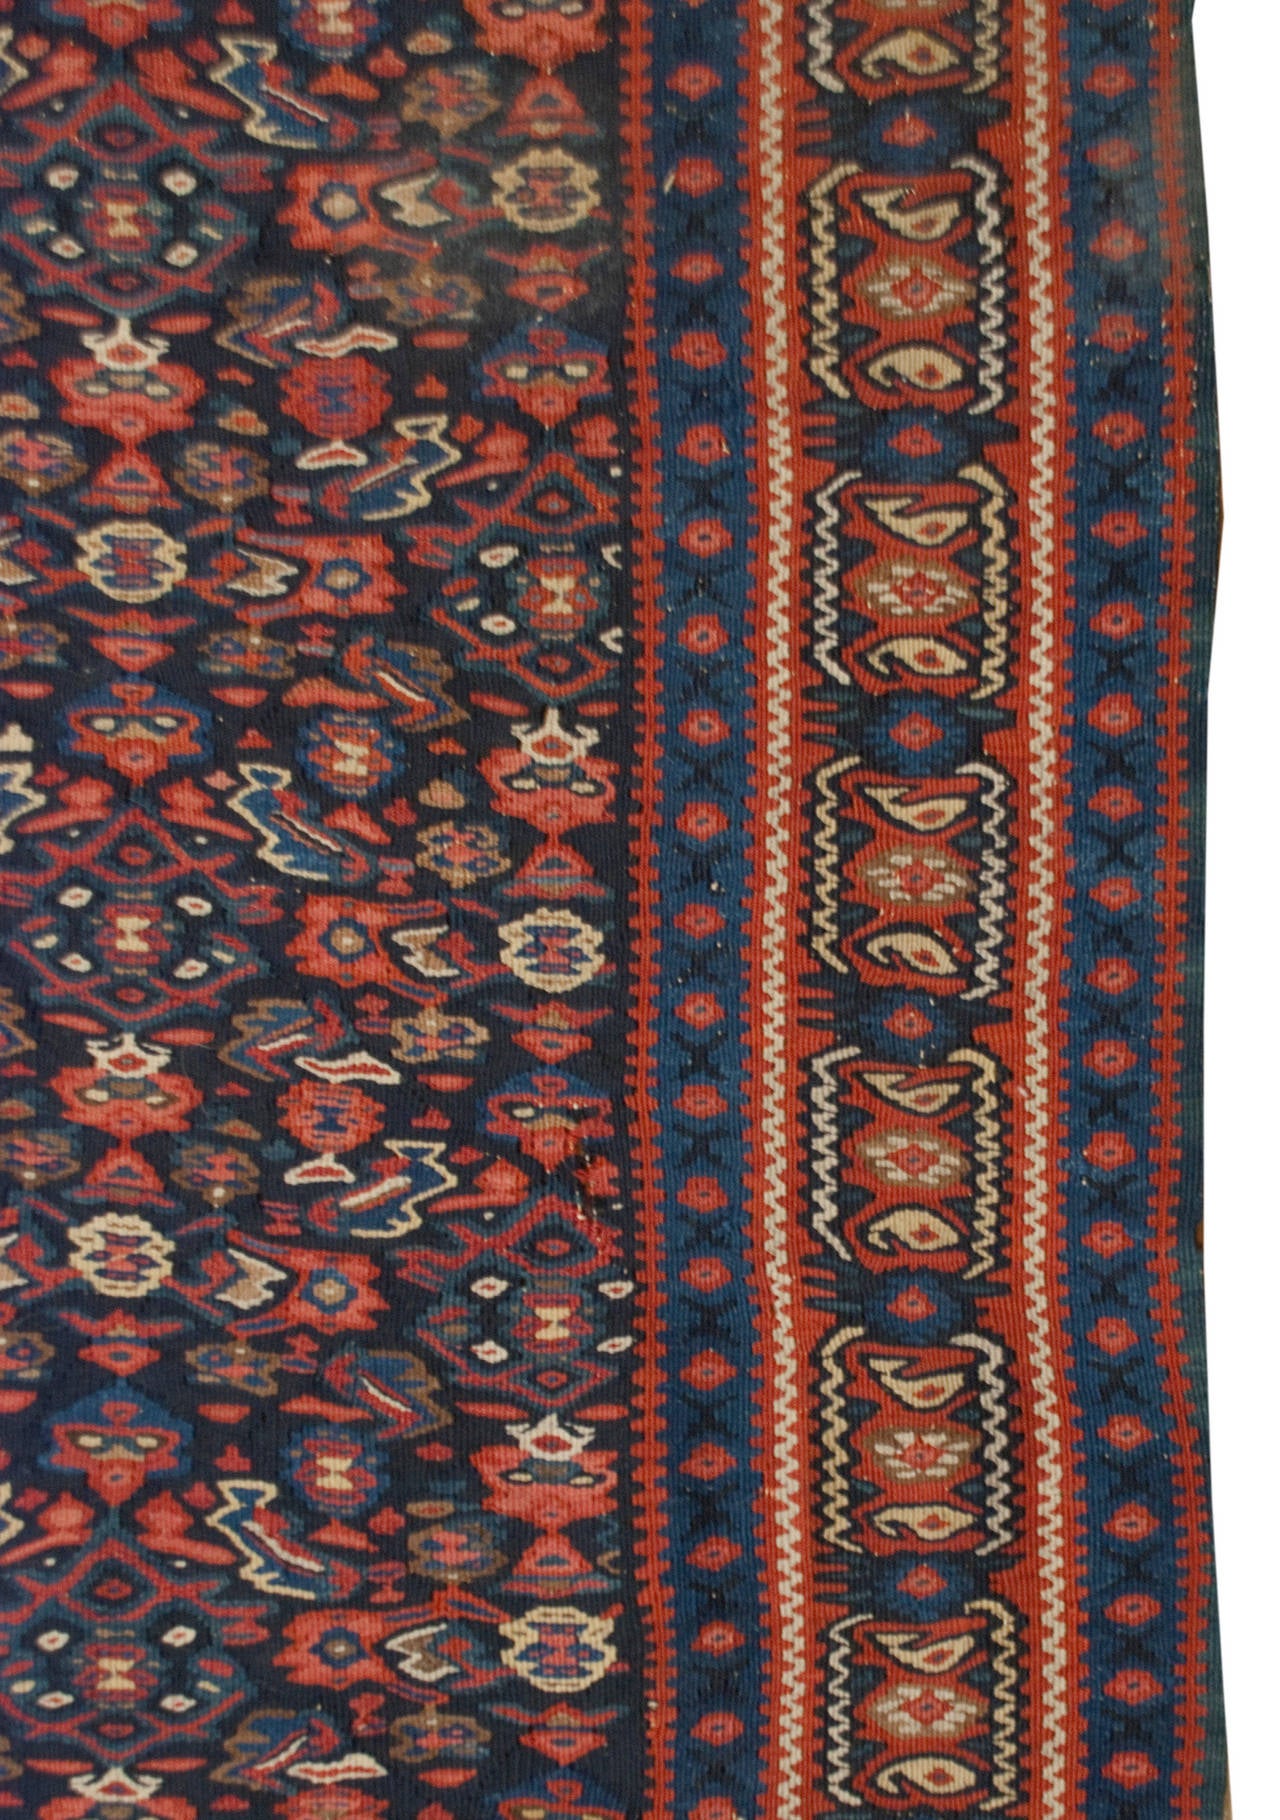 An early 20th century Persian Senneh rug with a beautiful all-over crimson and indigo field, surrounded by multiple complementary geometric and floral border.